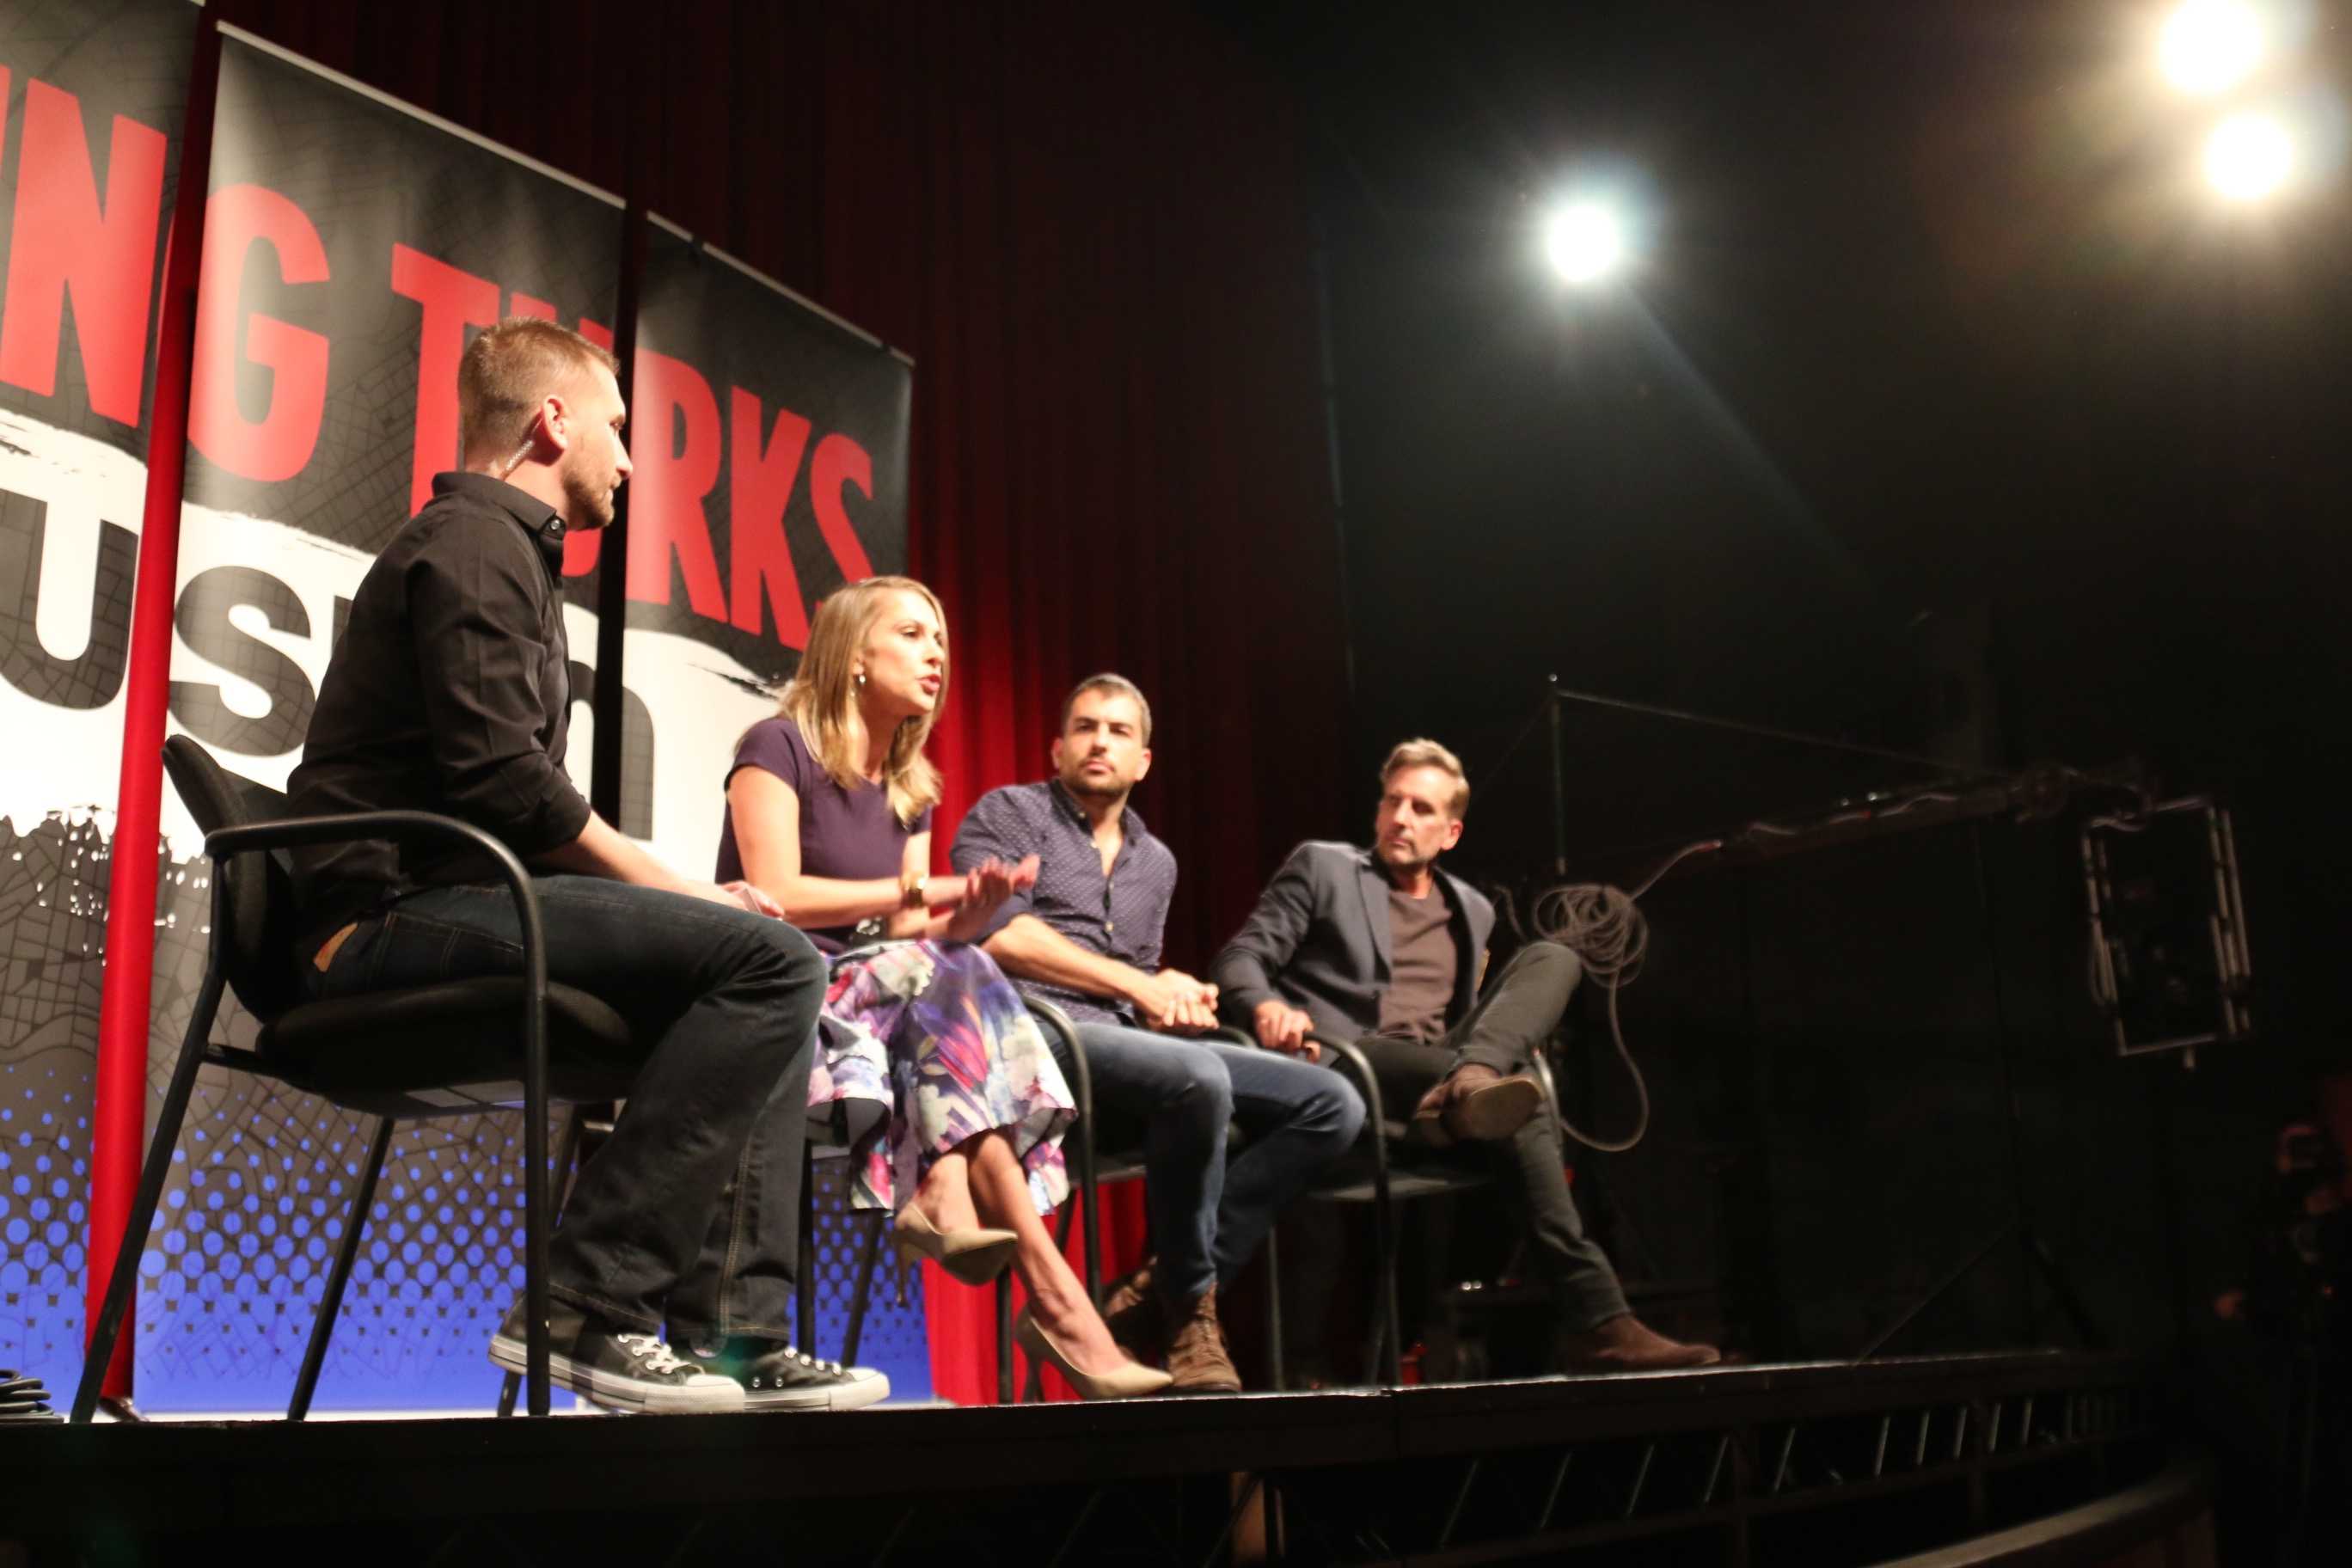 Ana Kasparian is shown in the middle of a discussion at The Young Turks panel